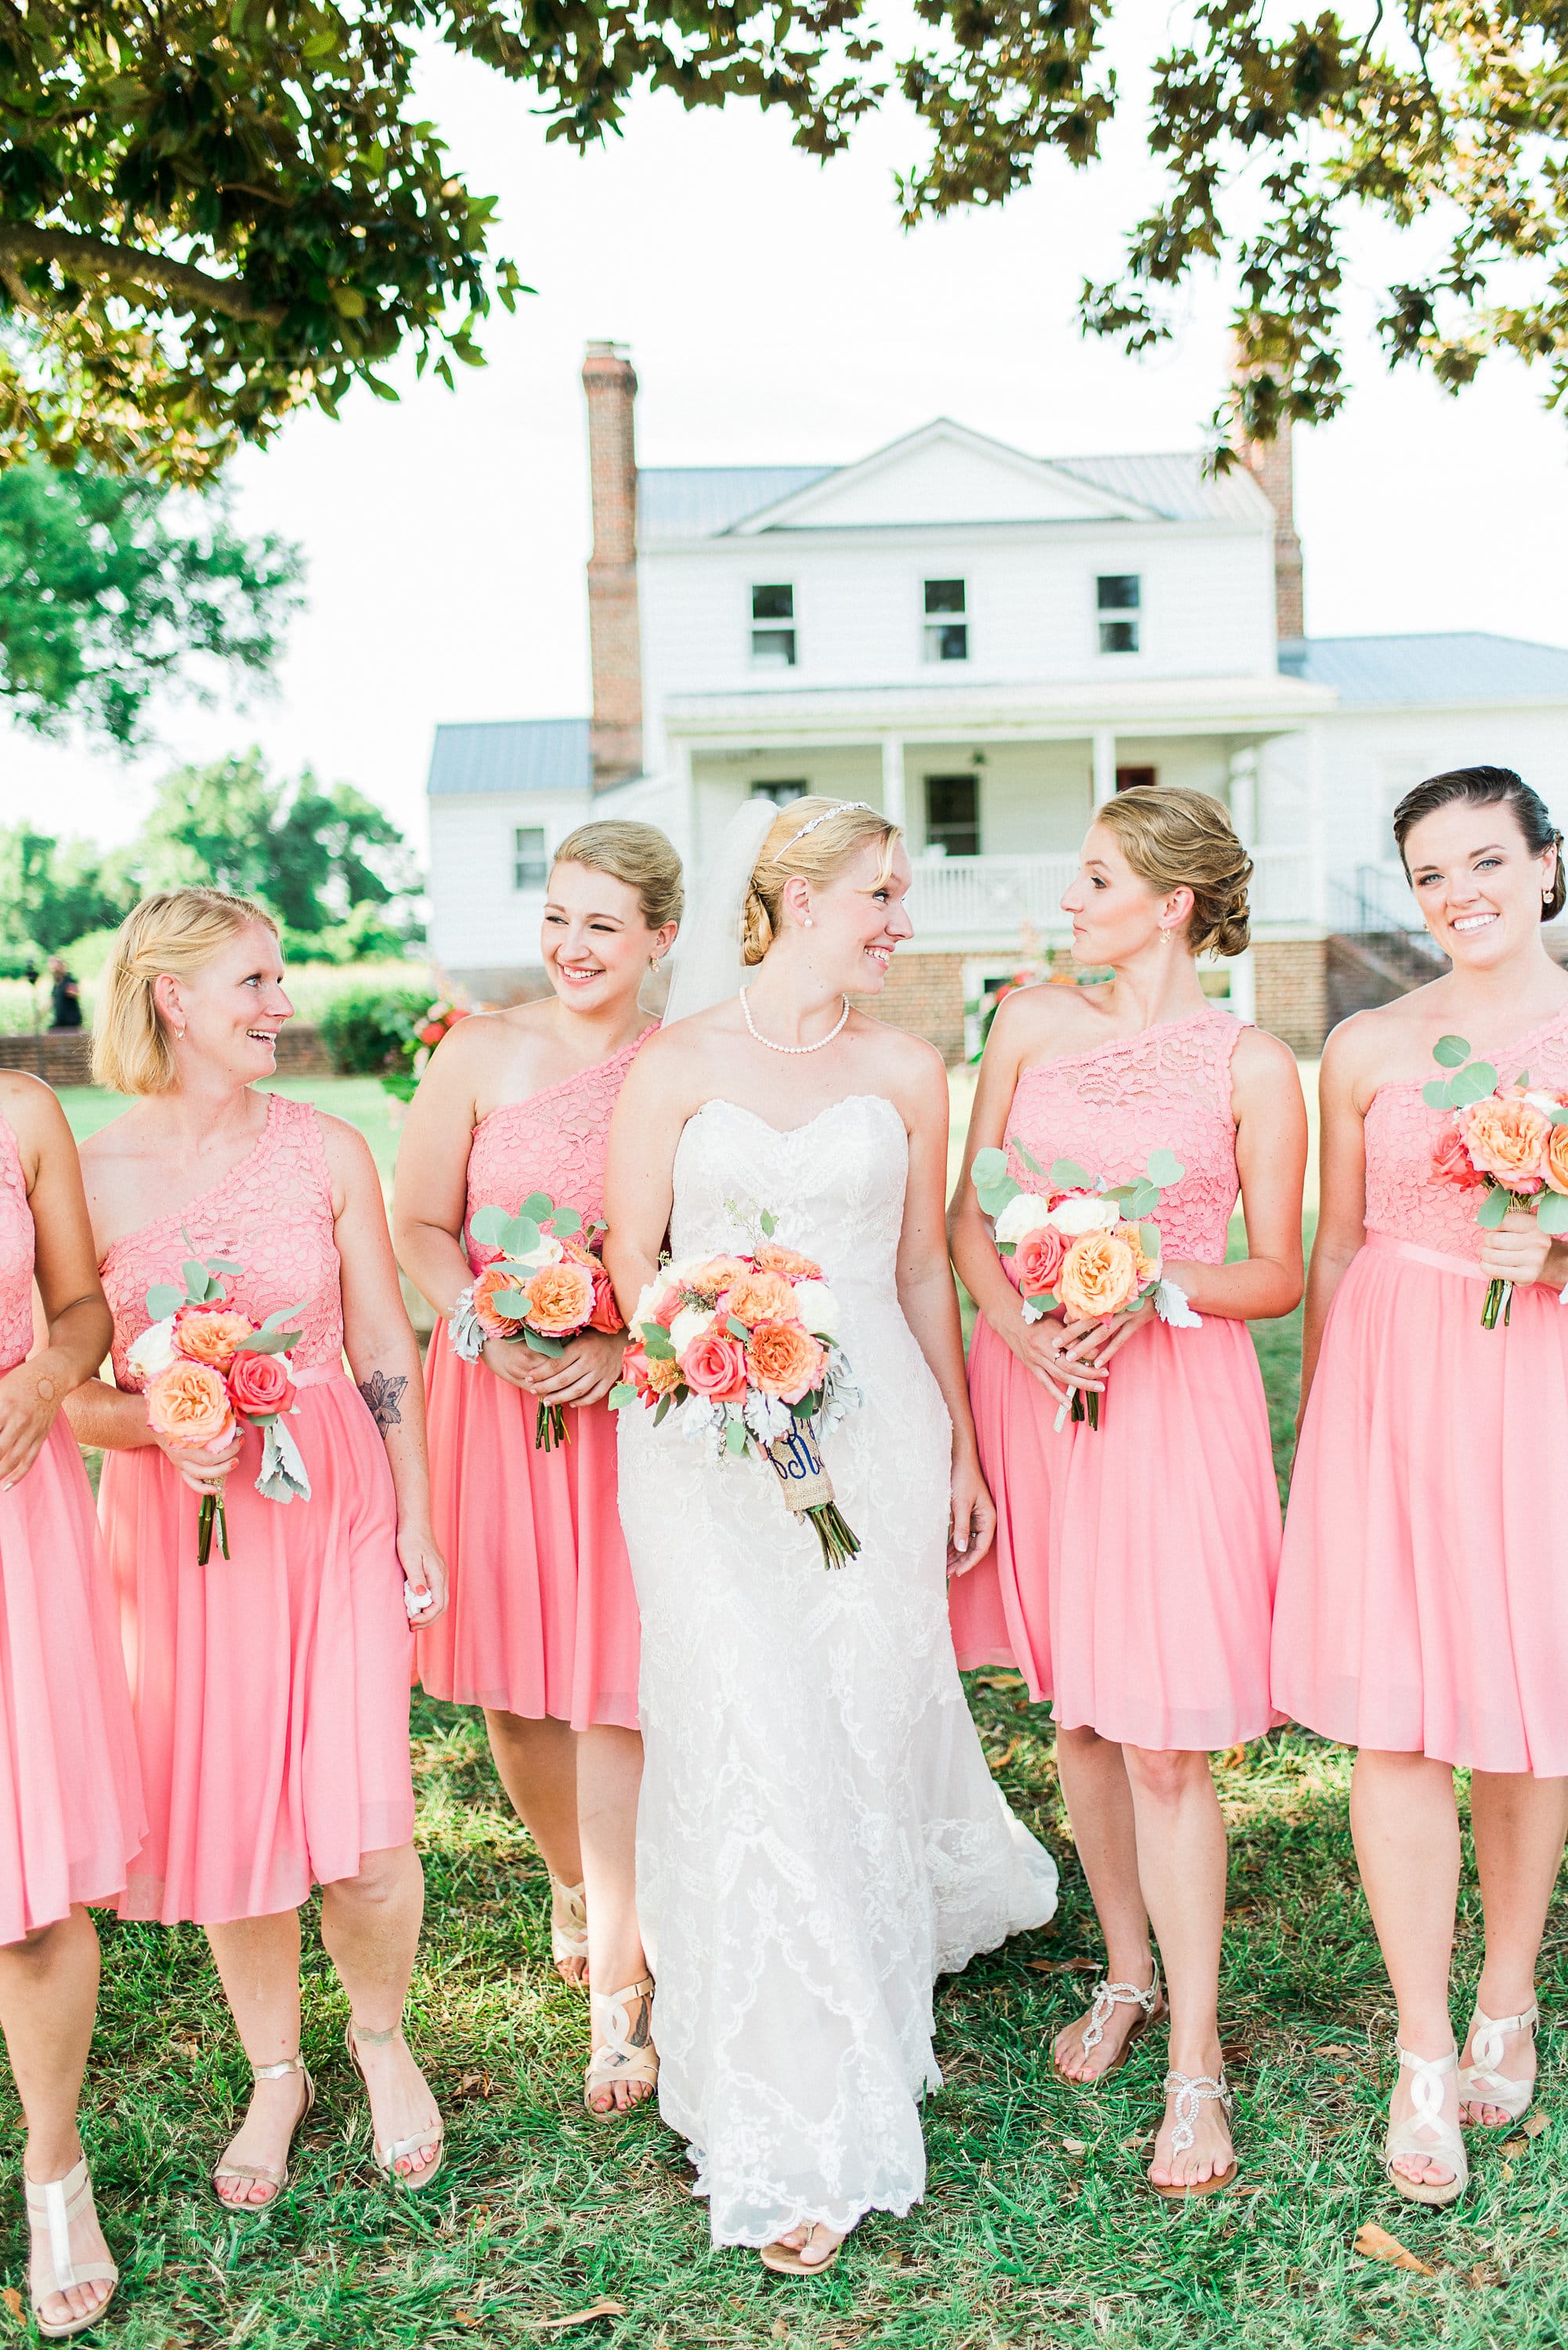 Blush Lace Wedding Dress in Classic + Colorful Nuptials. Kirstie blush wedding dress by Maggie Sottero.